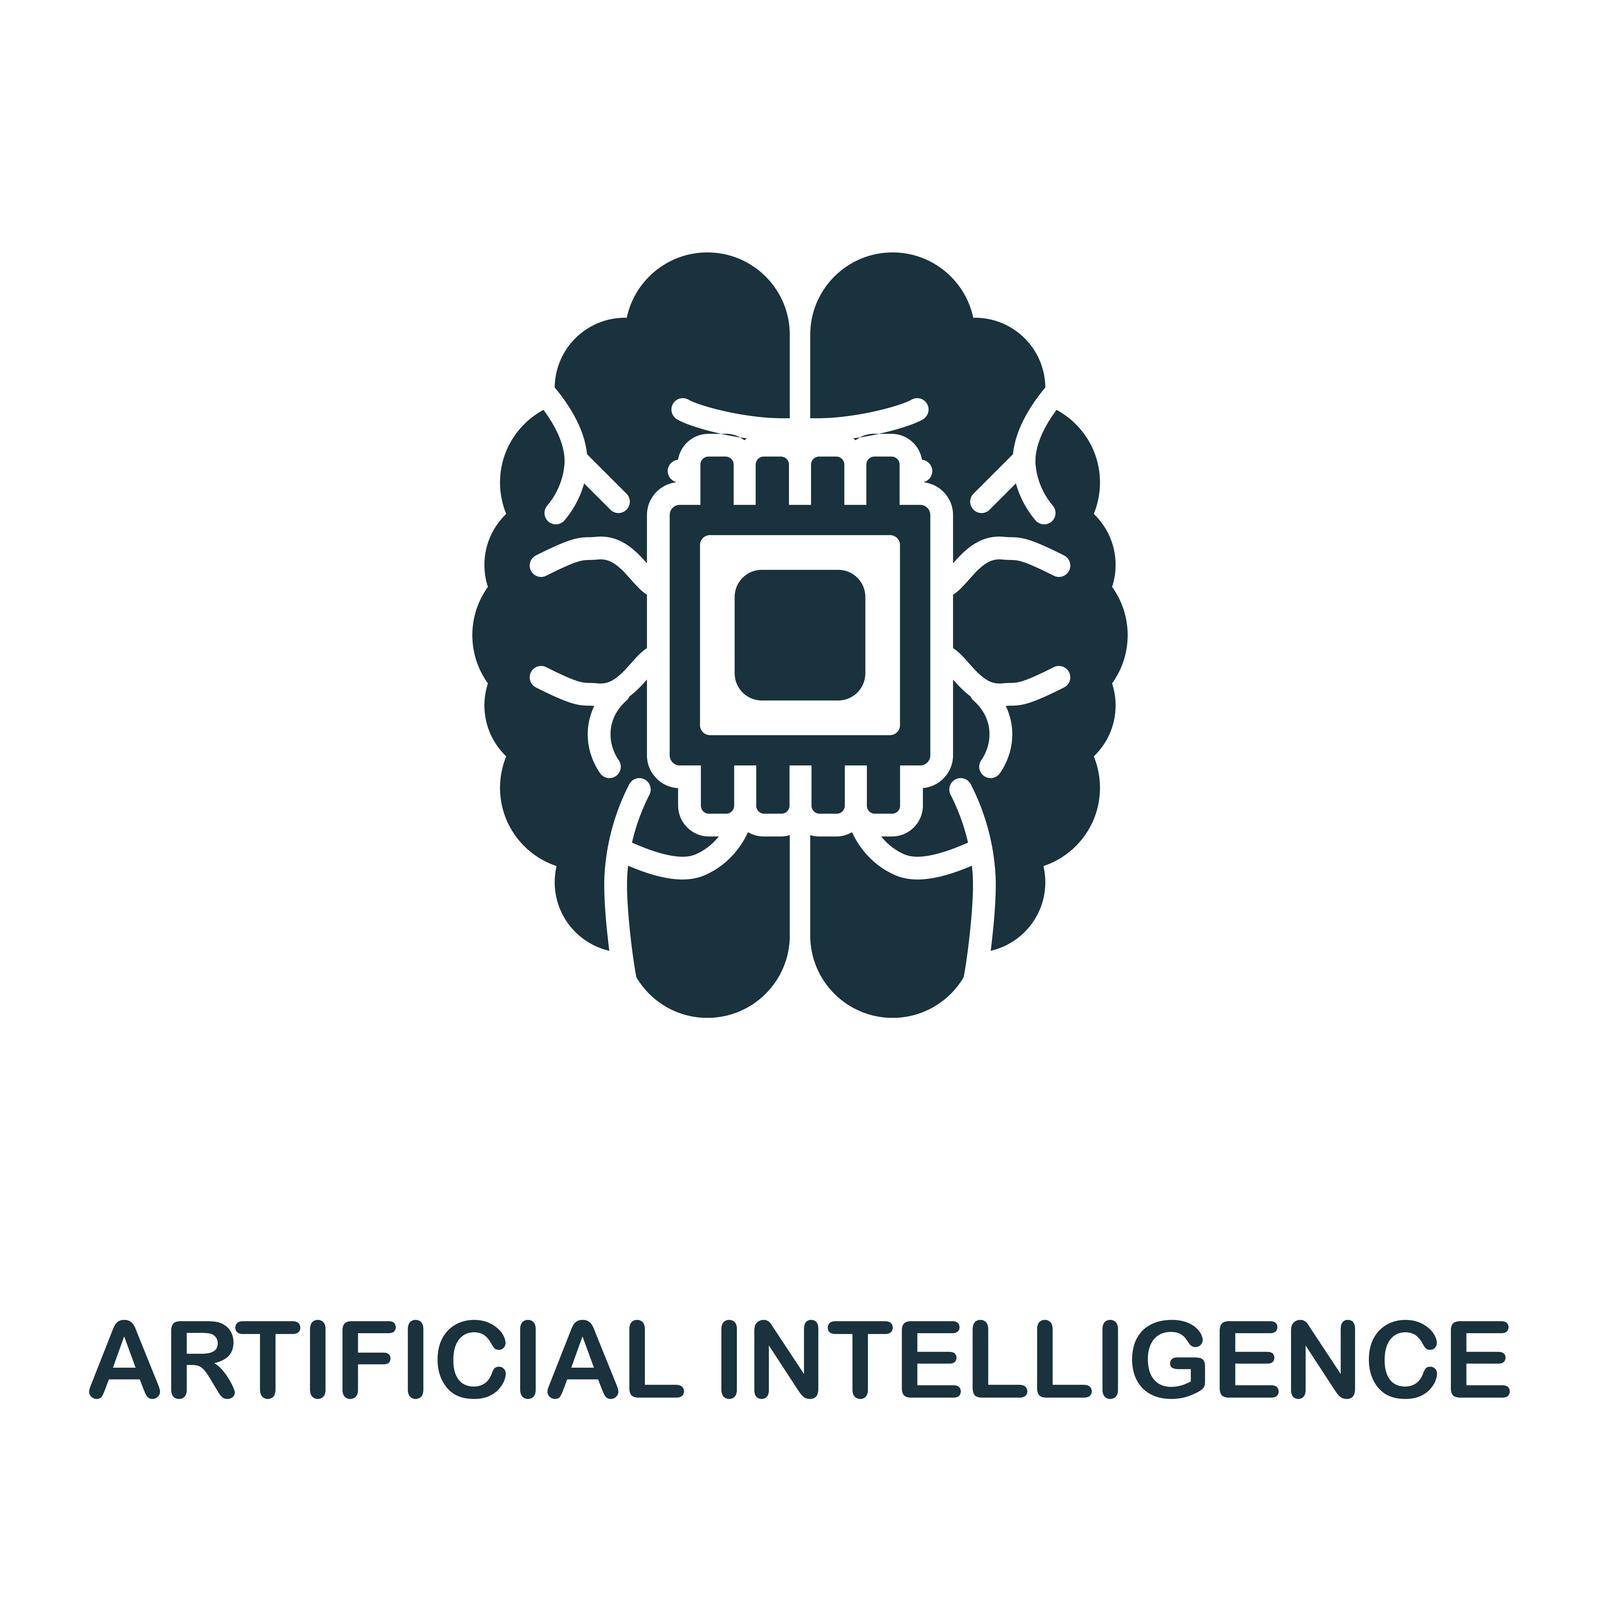 Artificial Intelligence icon. Monochrome simple Artificial Intelligence icon for templates, web design and infographics by simakovavector